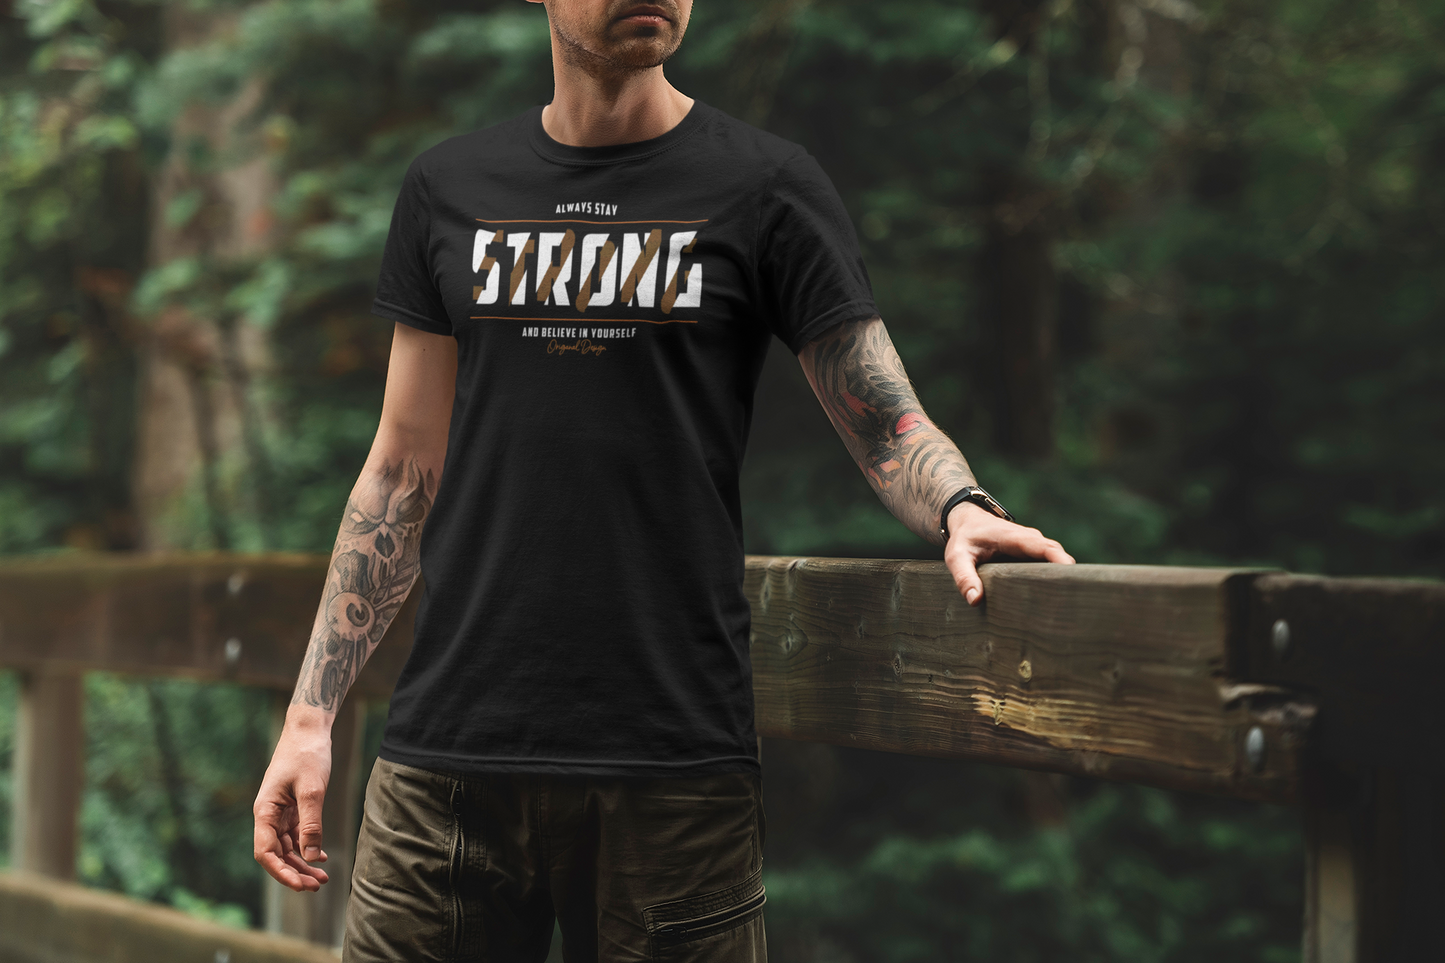 Always Stay Strong Custom Graphic Tee